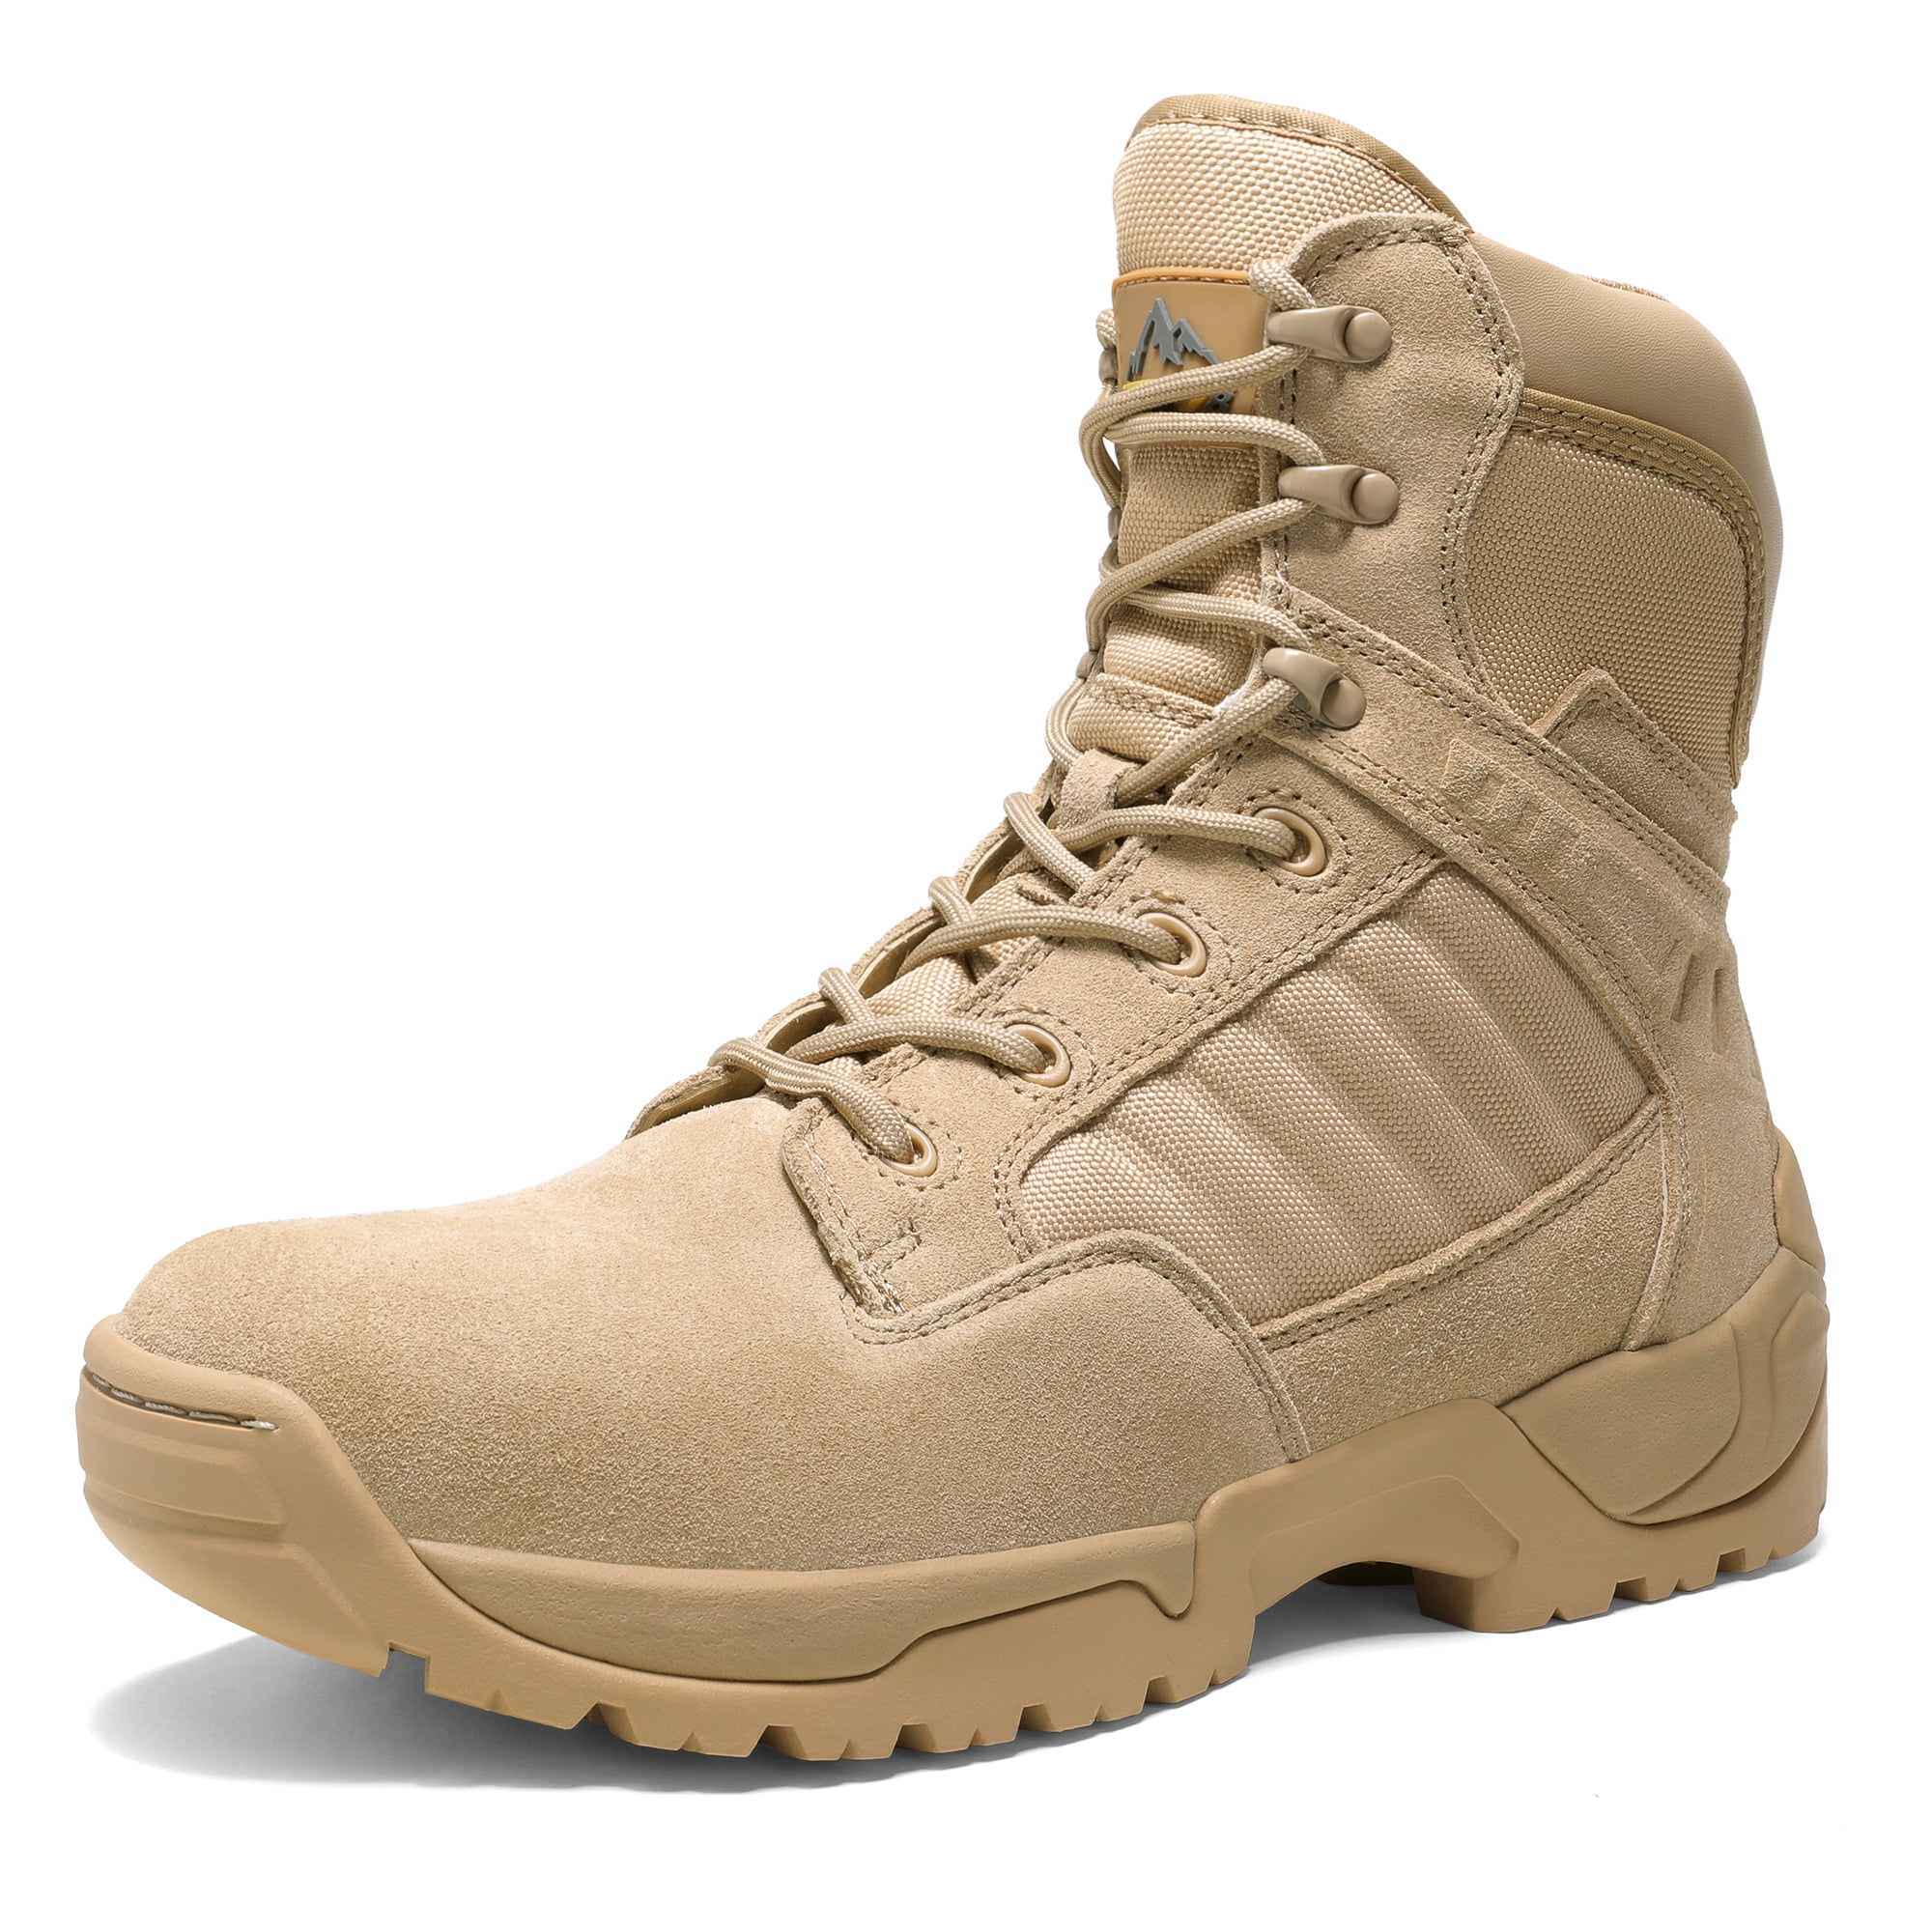 Nortiv8 Men's Military Tactical Work Side Zipper Leather Motorcycle Combat Boots DESERT-W SAND Size 13W Walmart.com